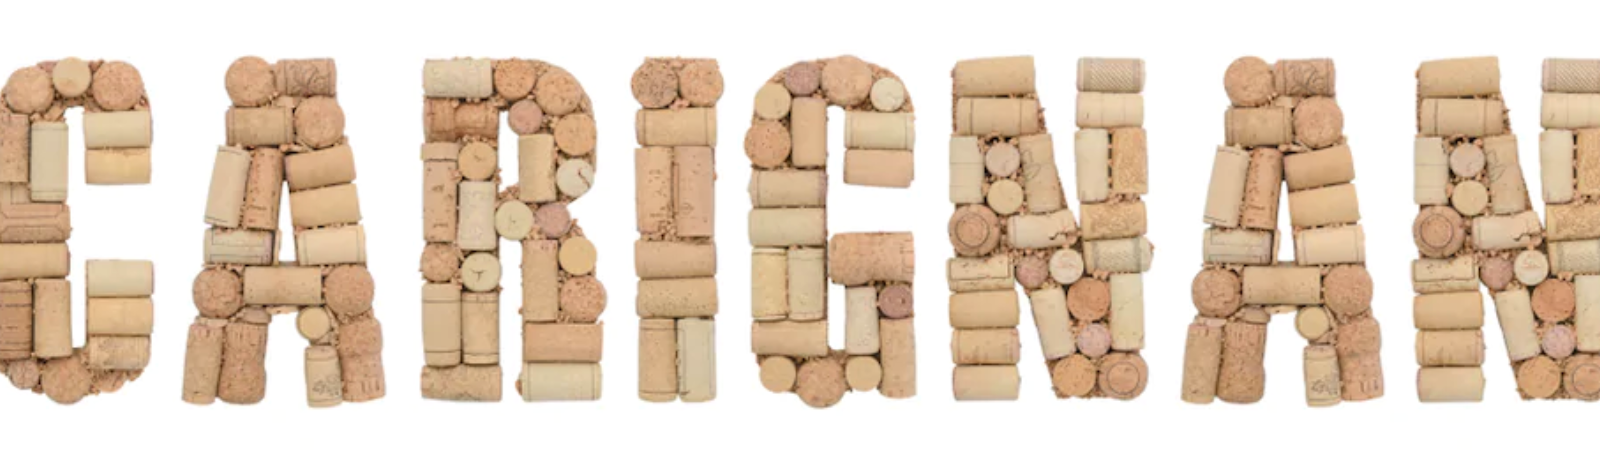 Carignan word made from cork